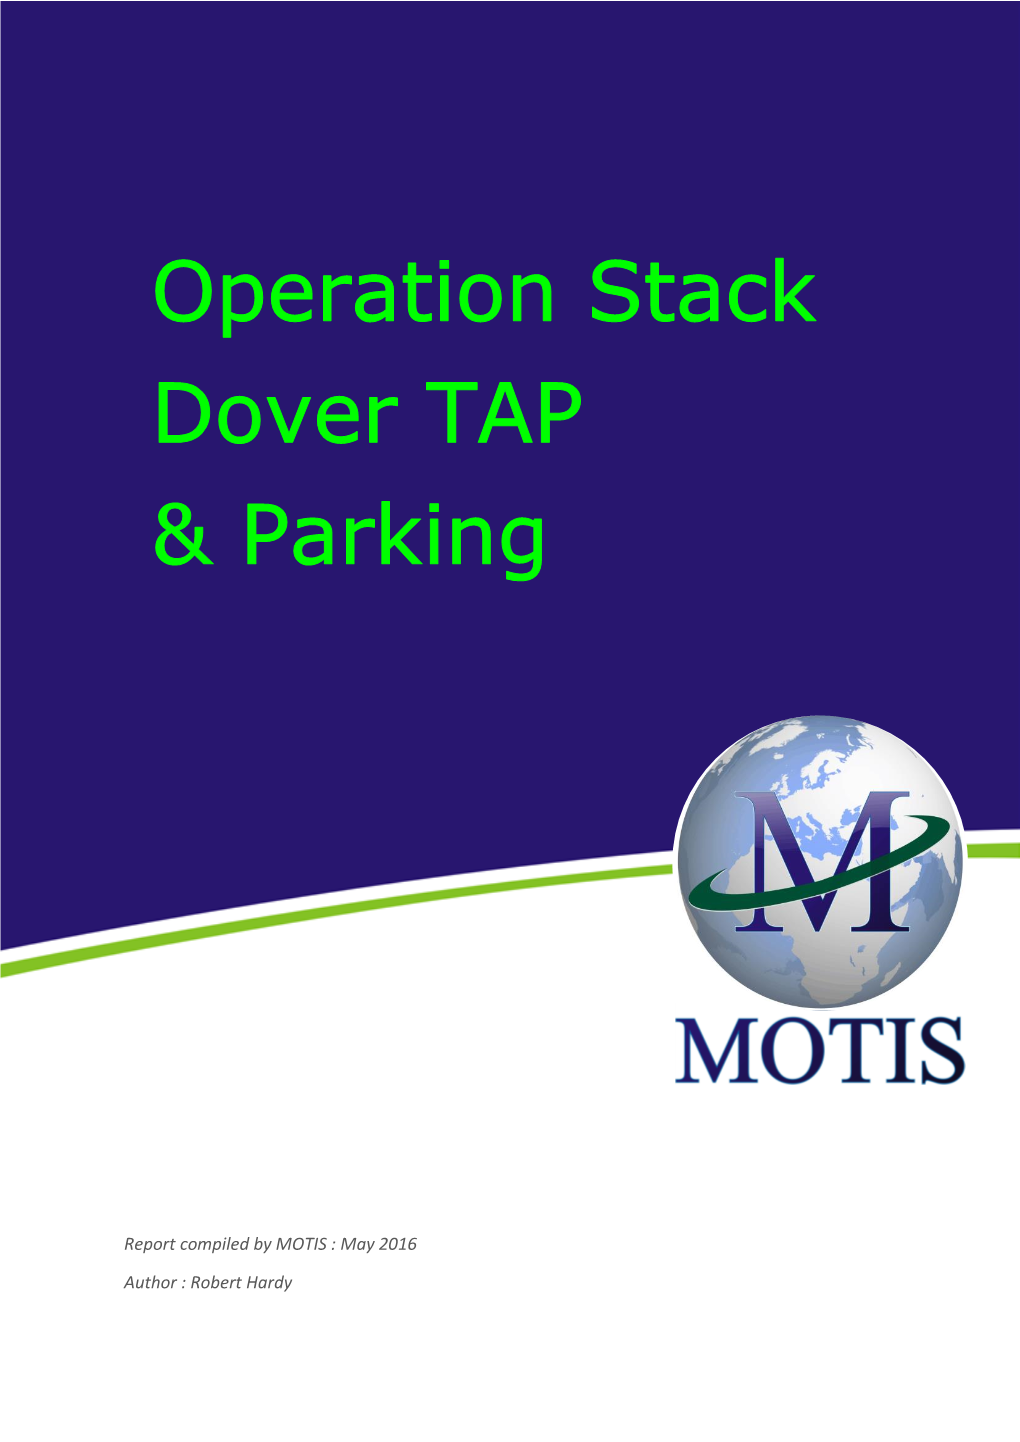 Operation Stack Dover TAP & Parking